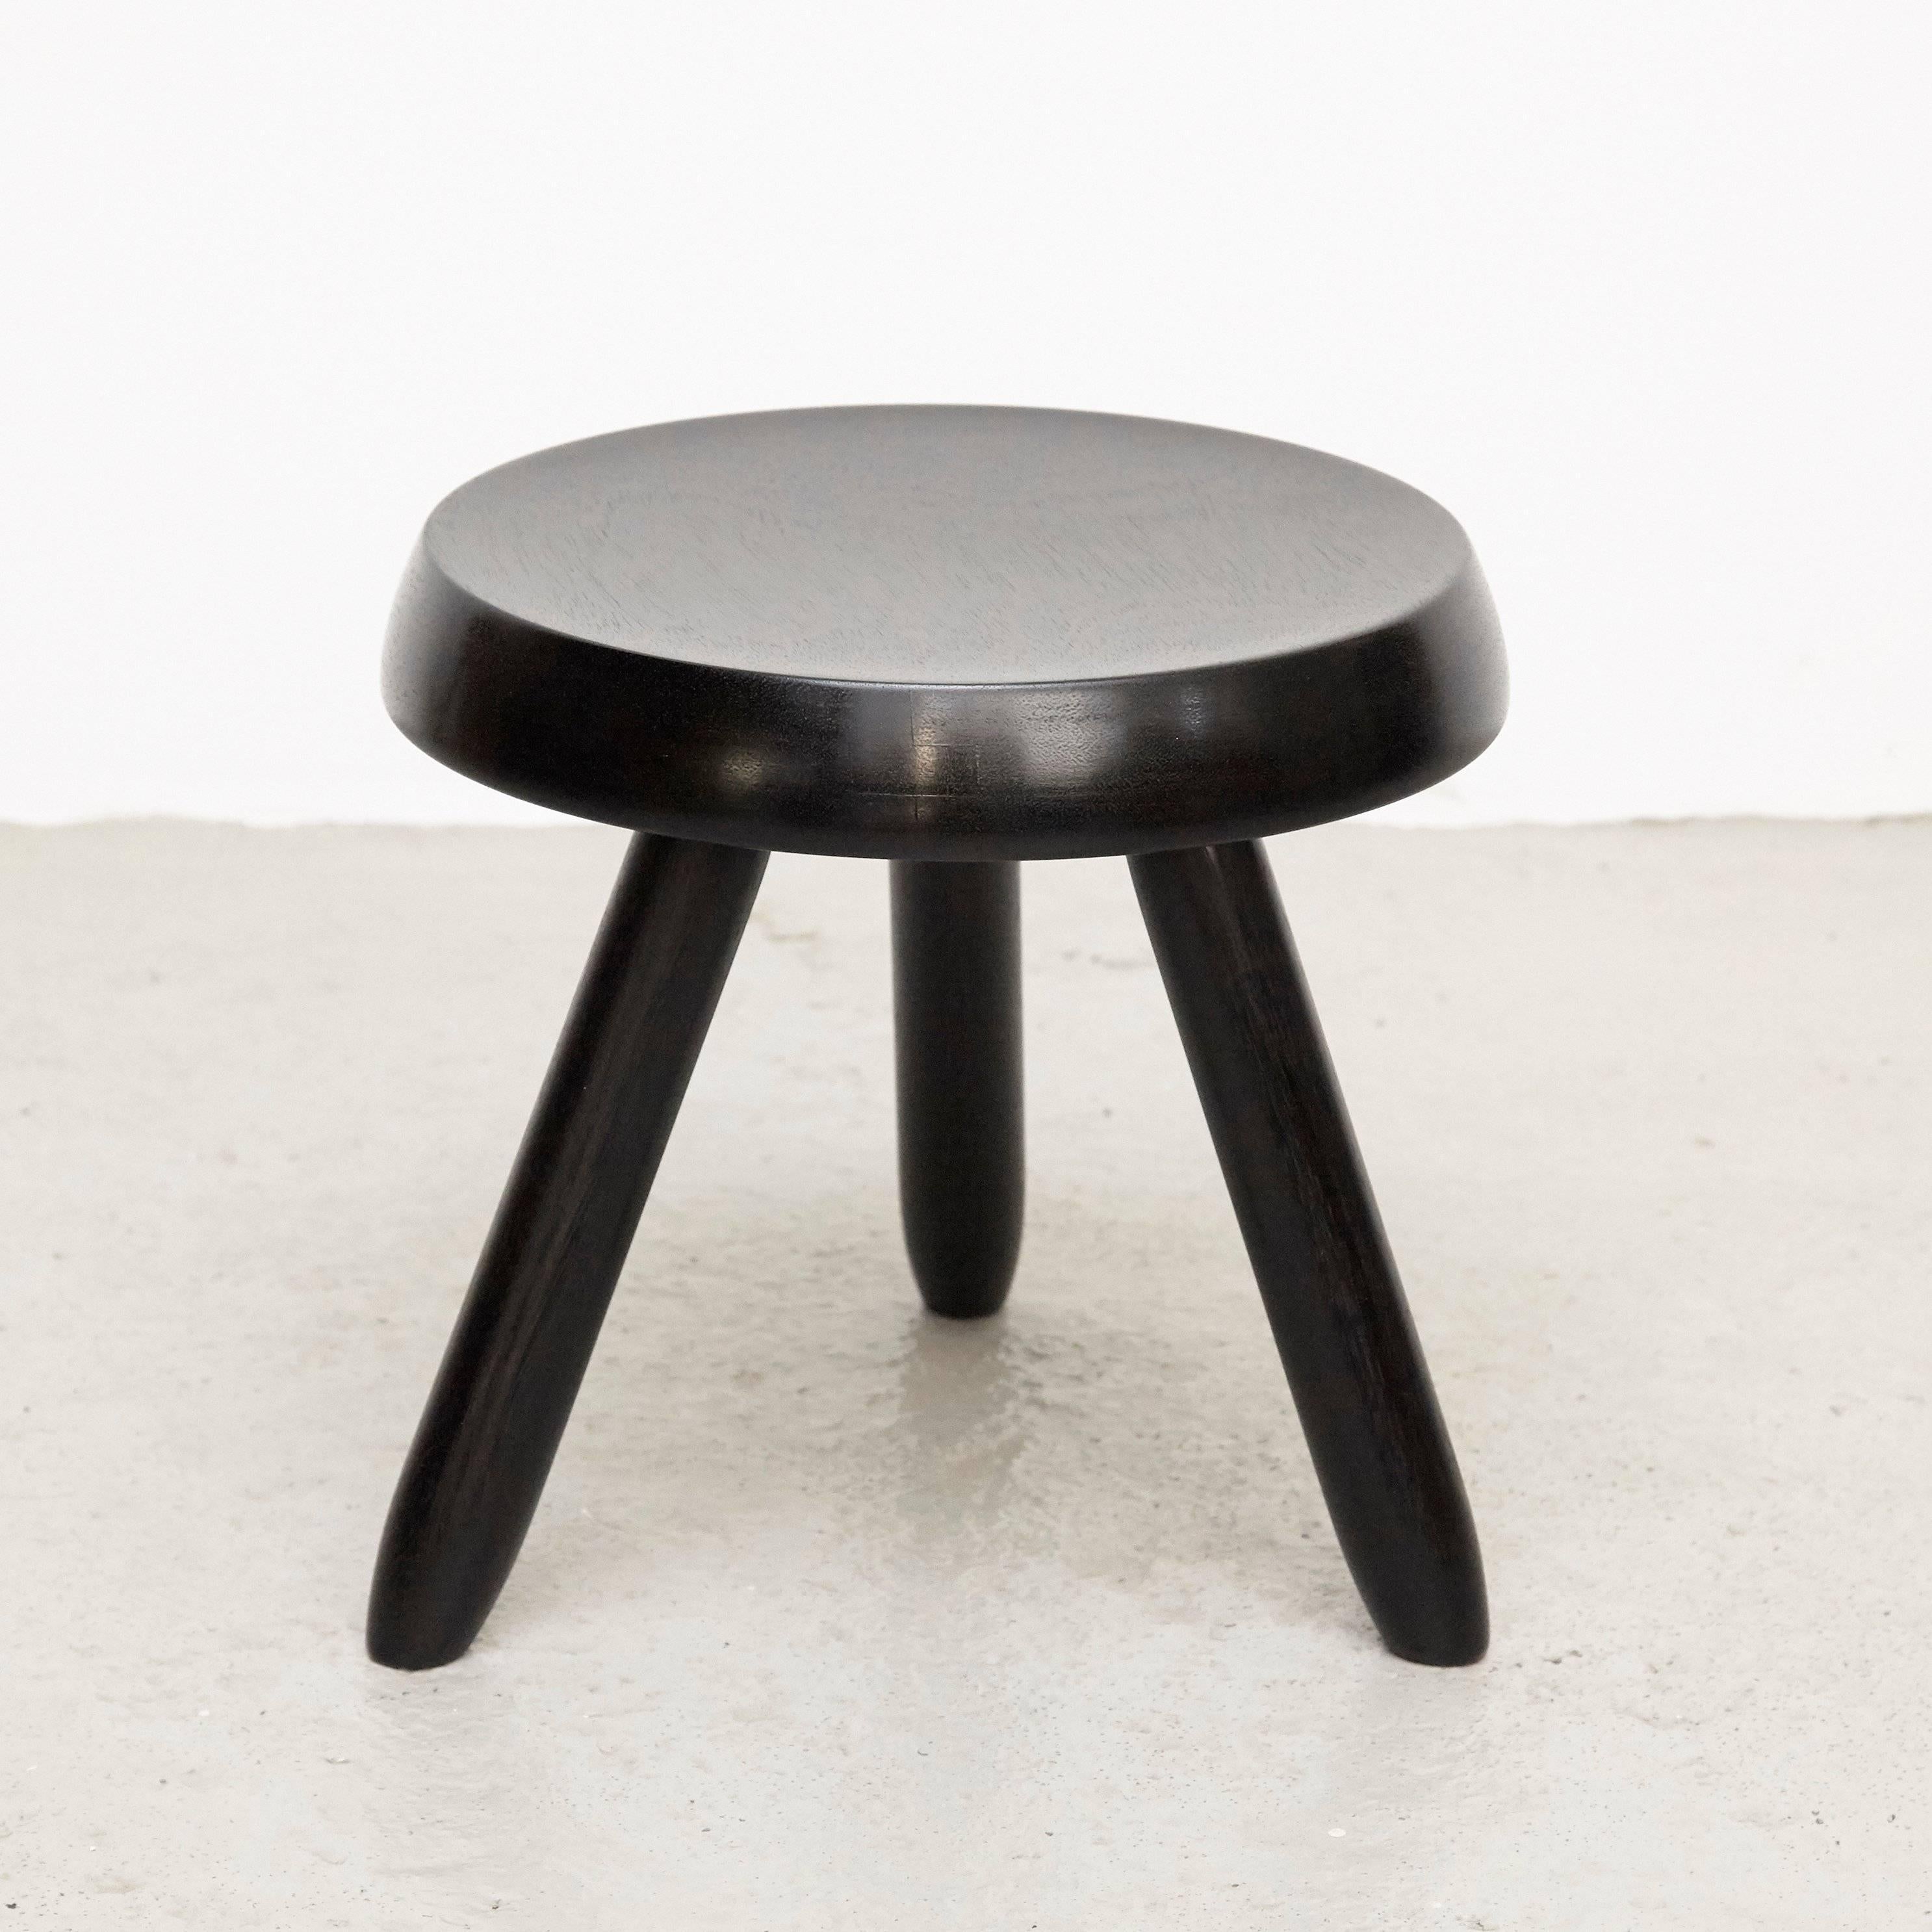 Stool designed in the style of Charlotte Perriand, made by unknown manufacturer.

In good original condition, preserving a beautiful patina, with minor wear consistent with age and use. 

Charlotte Perriand (1903-1999) She was born in Paris in